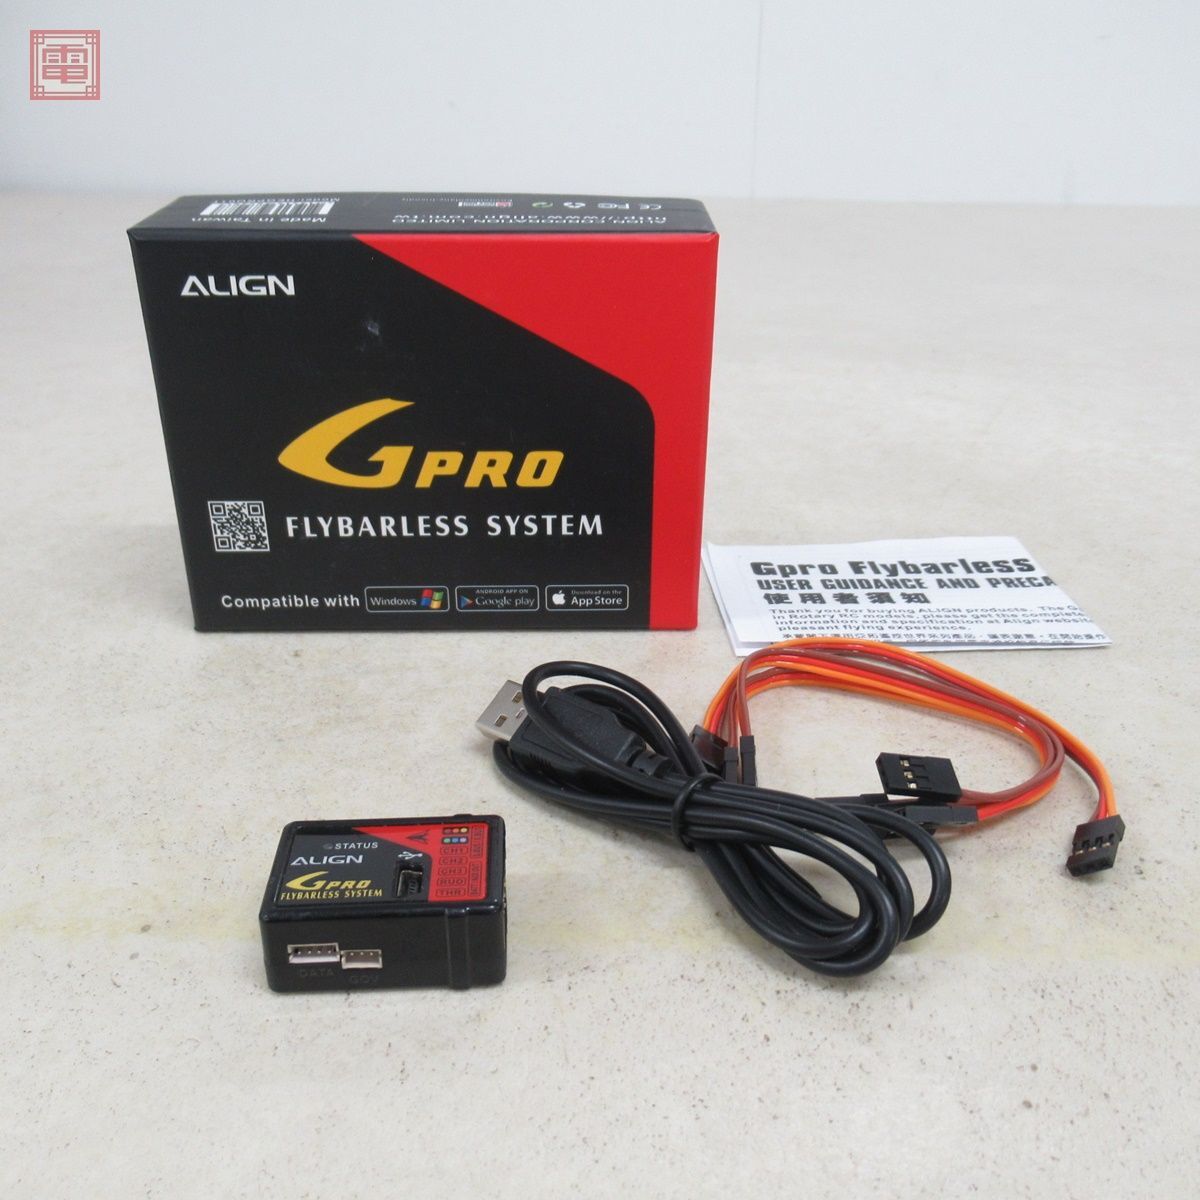 a line GPRO fly bar less system Gyro RC ALIGN operation not yet verification [10